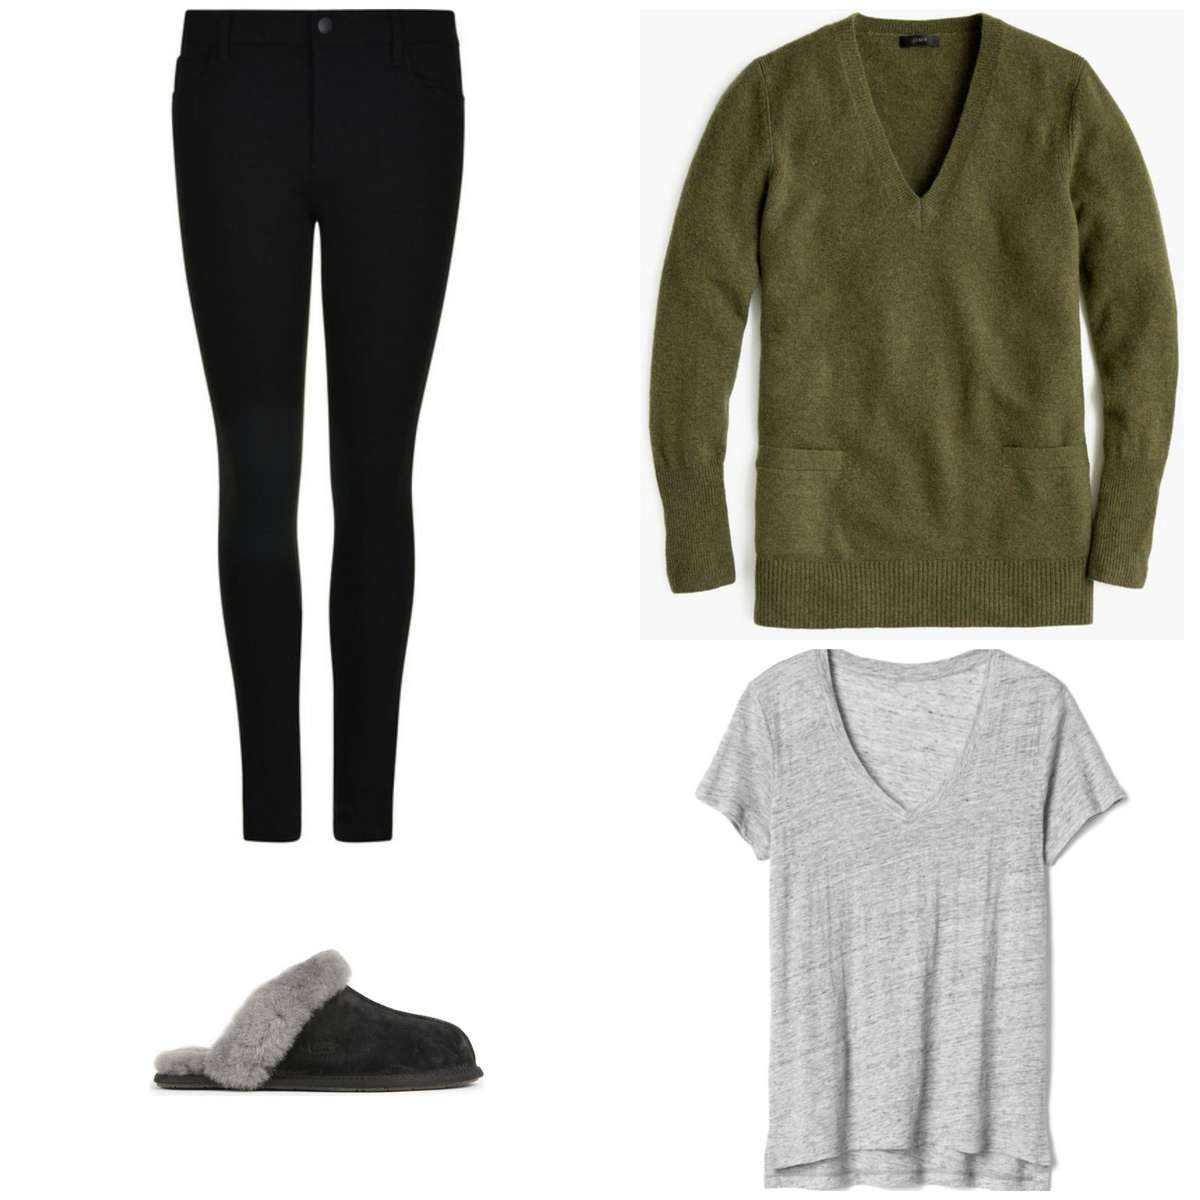 capsule wardrobe for the teleworker featuring soft and comfortable yet chic pieces to mix and match for a month of fashion